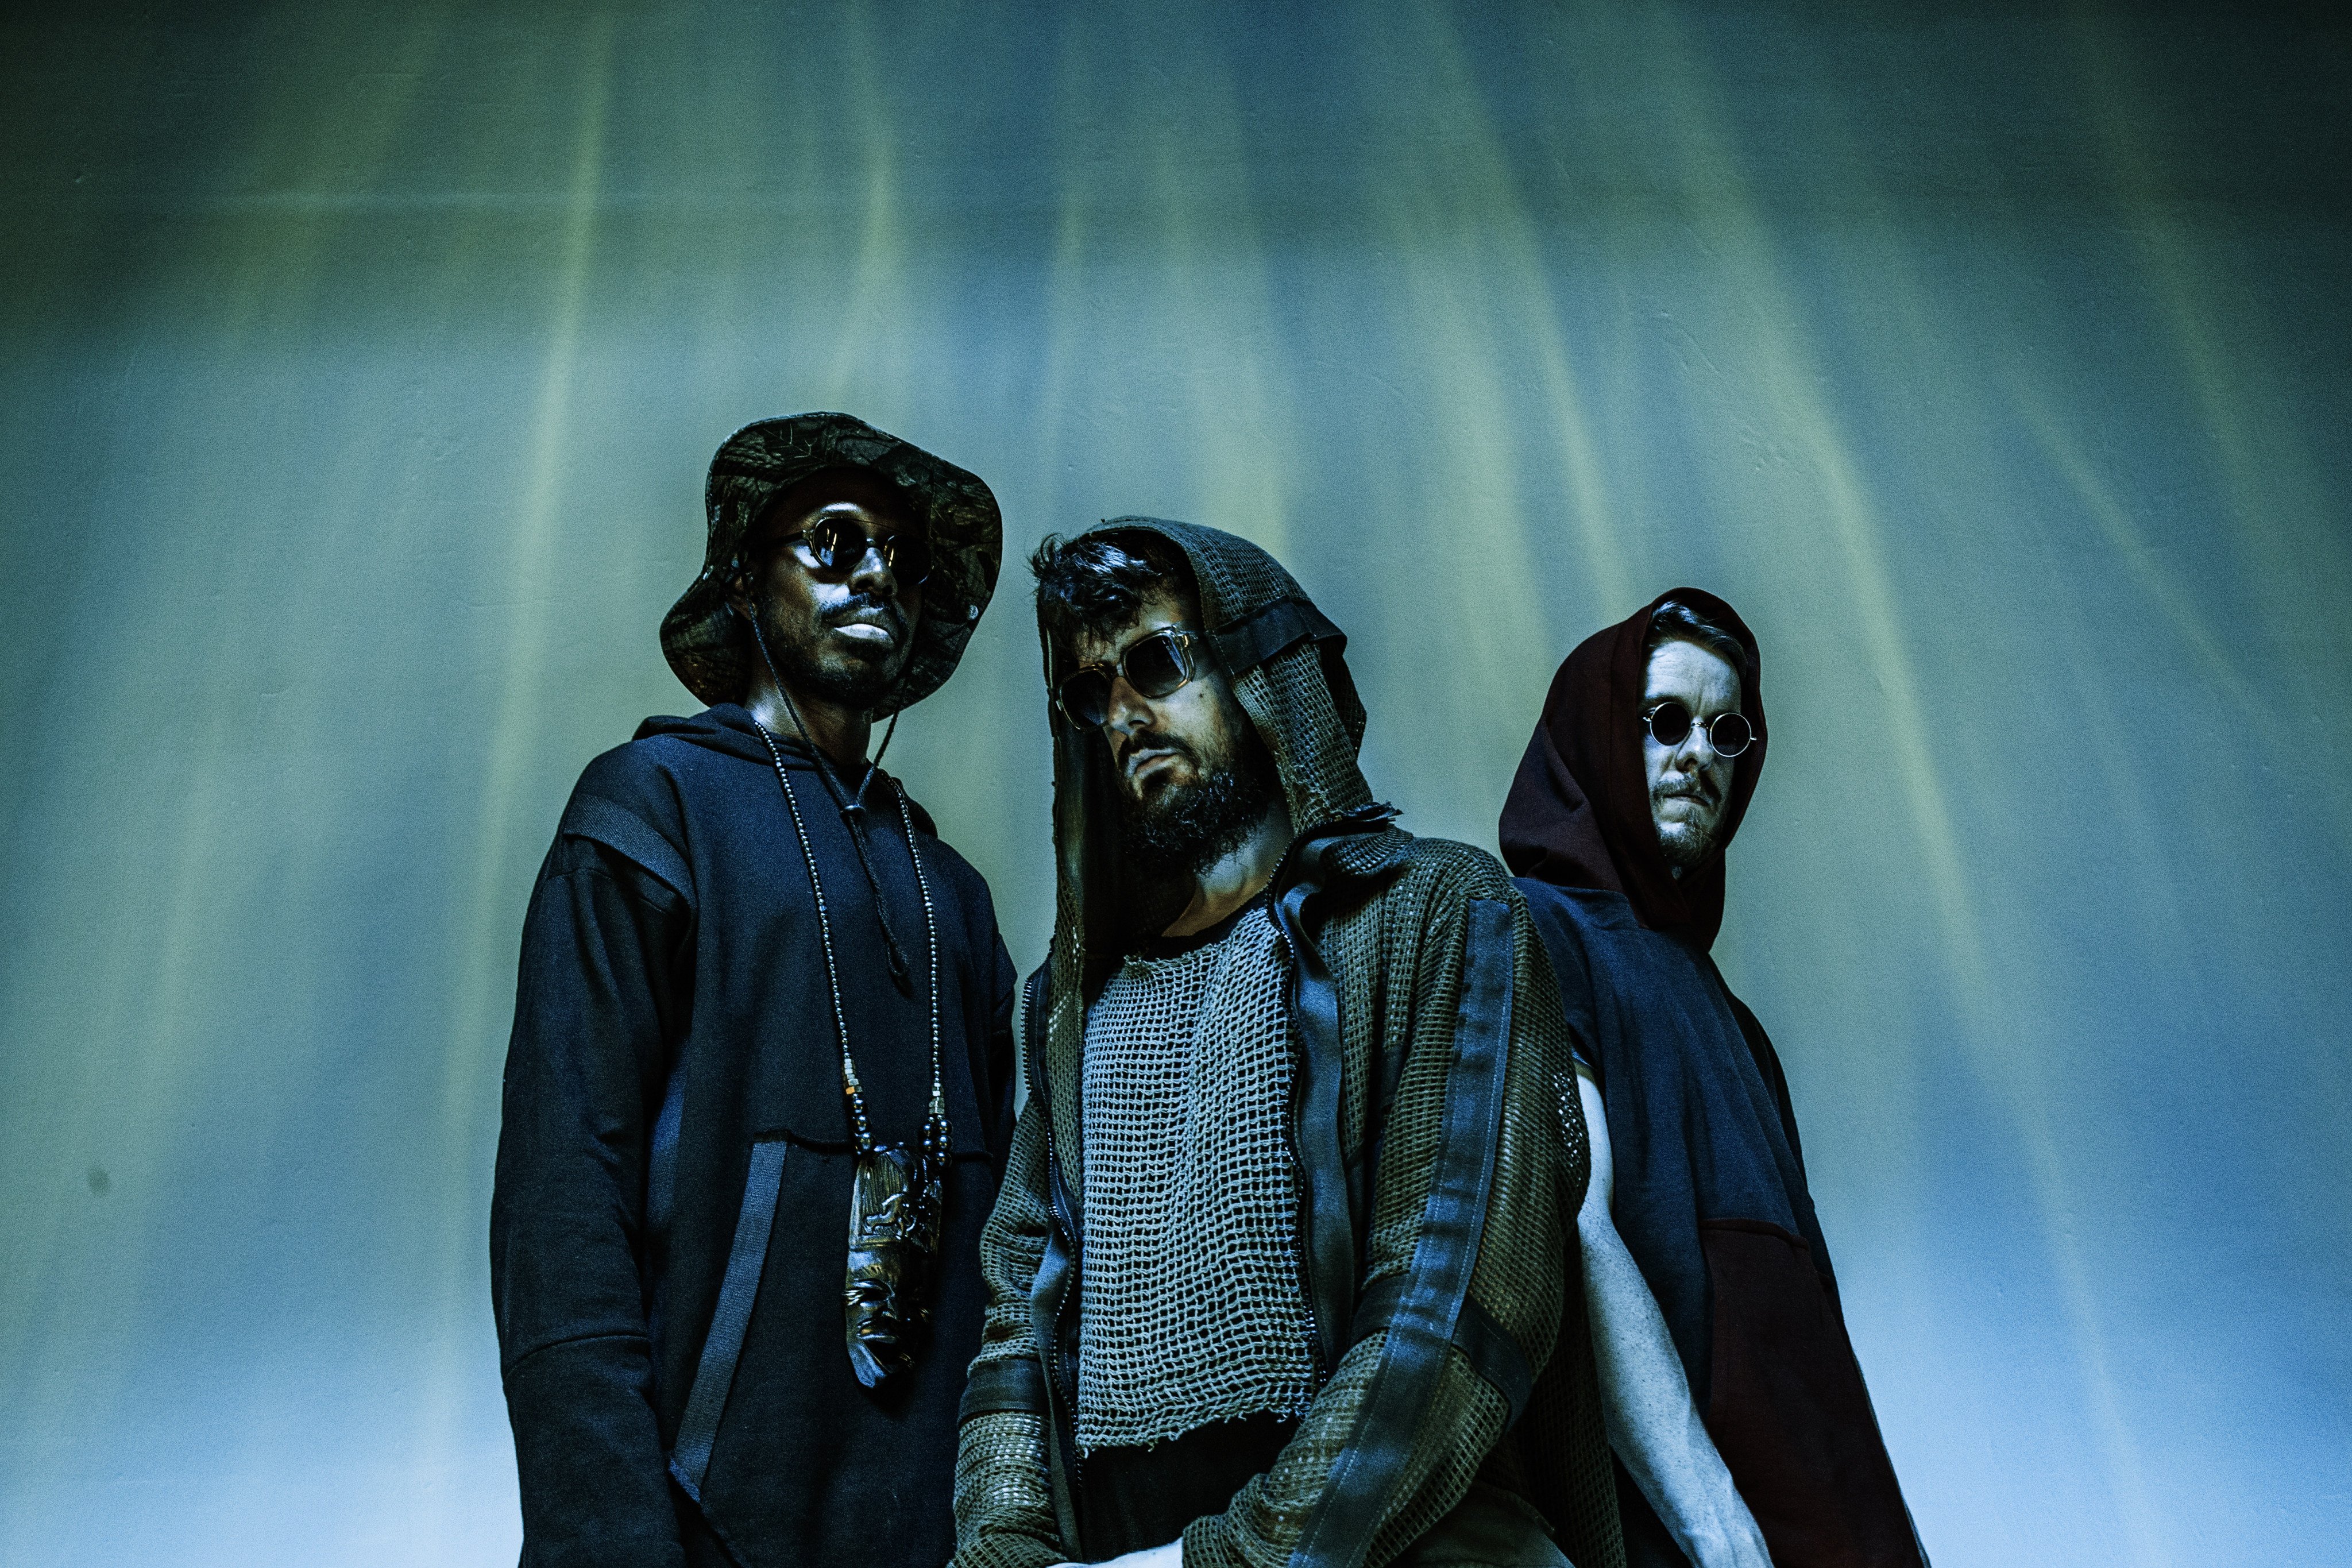 UK electro-jazz trio The Comet is Coming – Shabaka Hutchings (King Shabaka), Dan Leavers (Danalogue) and Max Hallett (Betamax) – will be on an indefinite hiatus after their final show on October 20. Photo: Handout
